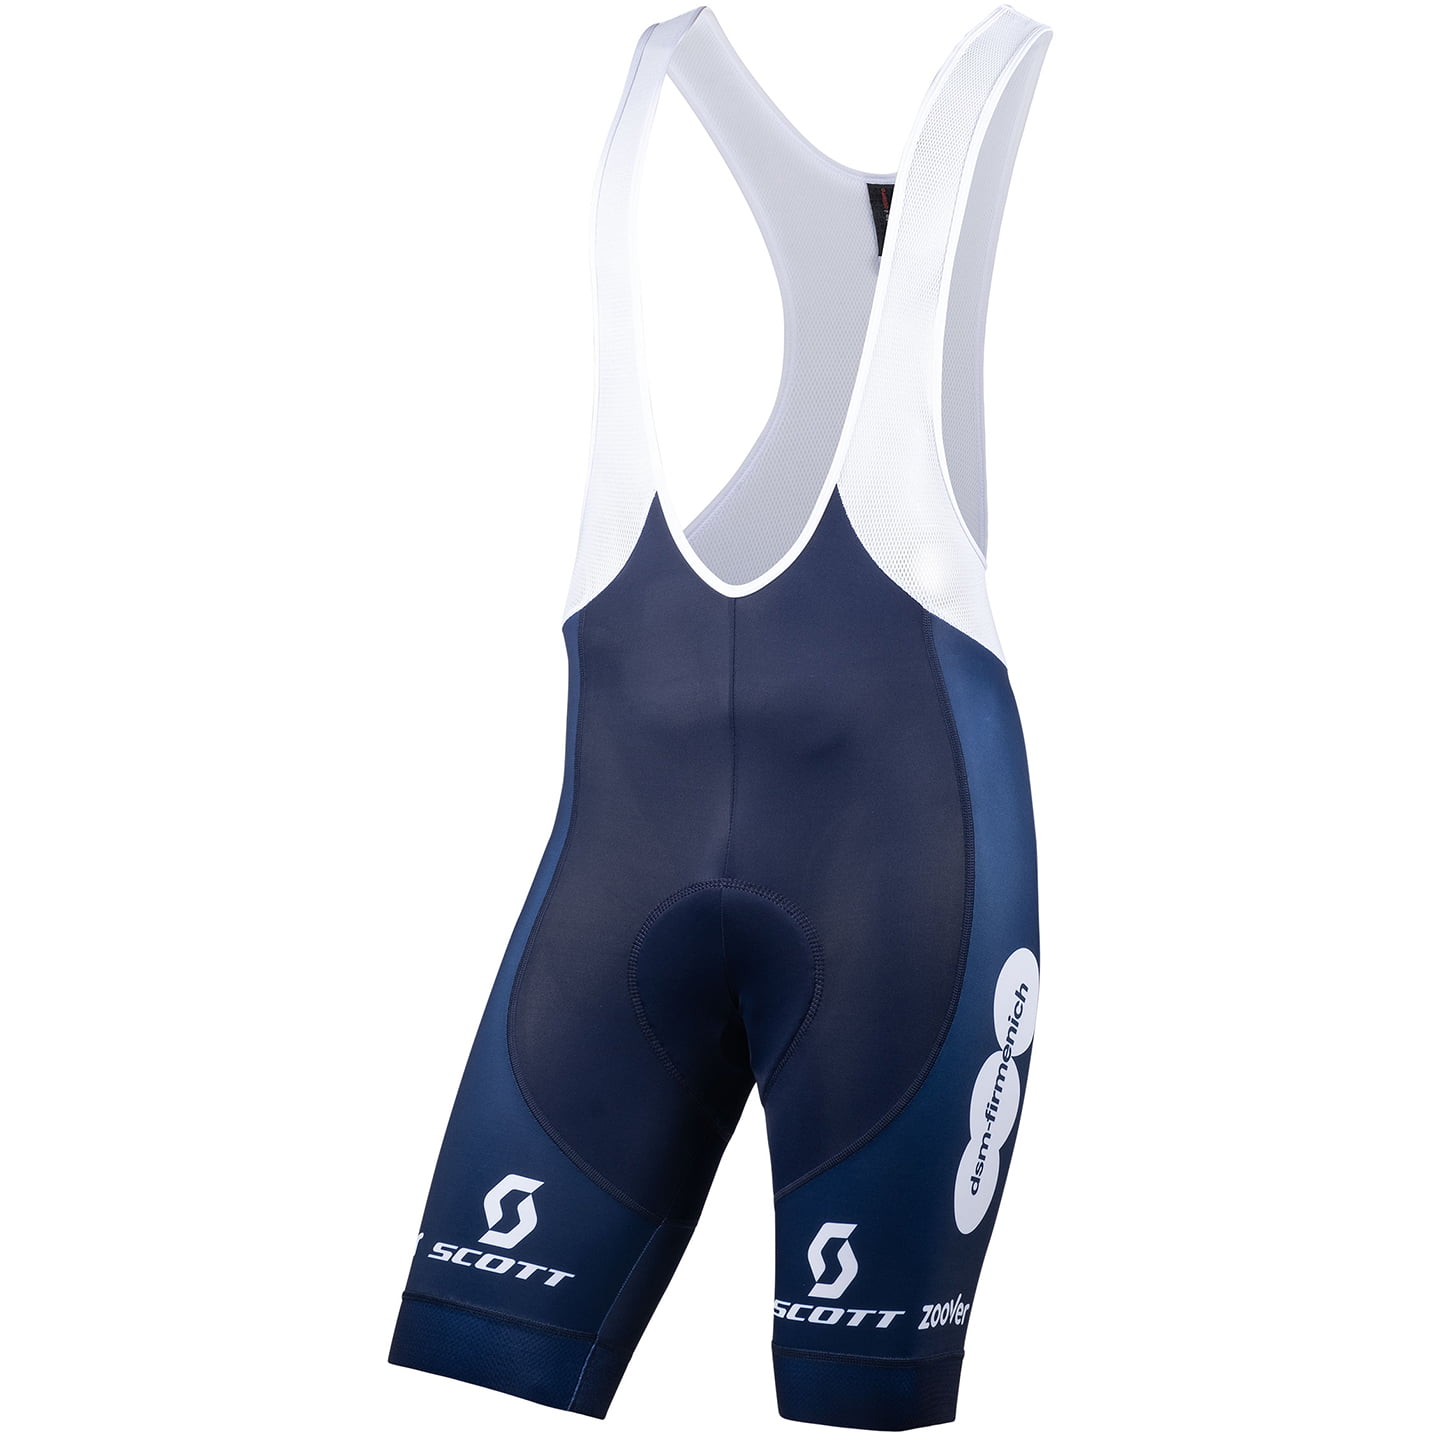 TEAM DSM TdF 2023 Bib Shorts, for men, size XL, Cycle trousers, Cycle clothing